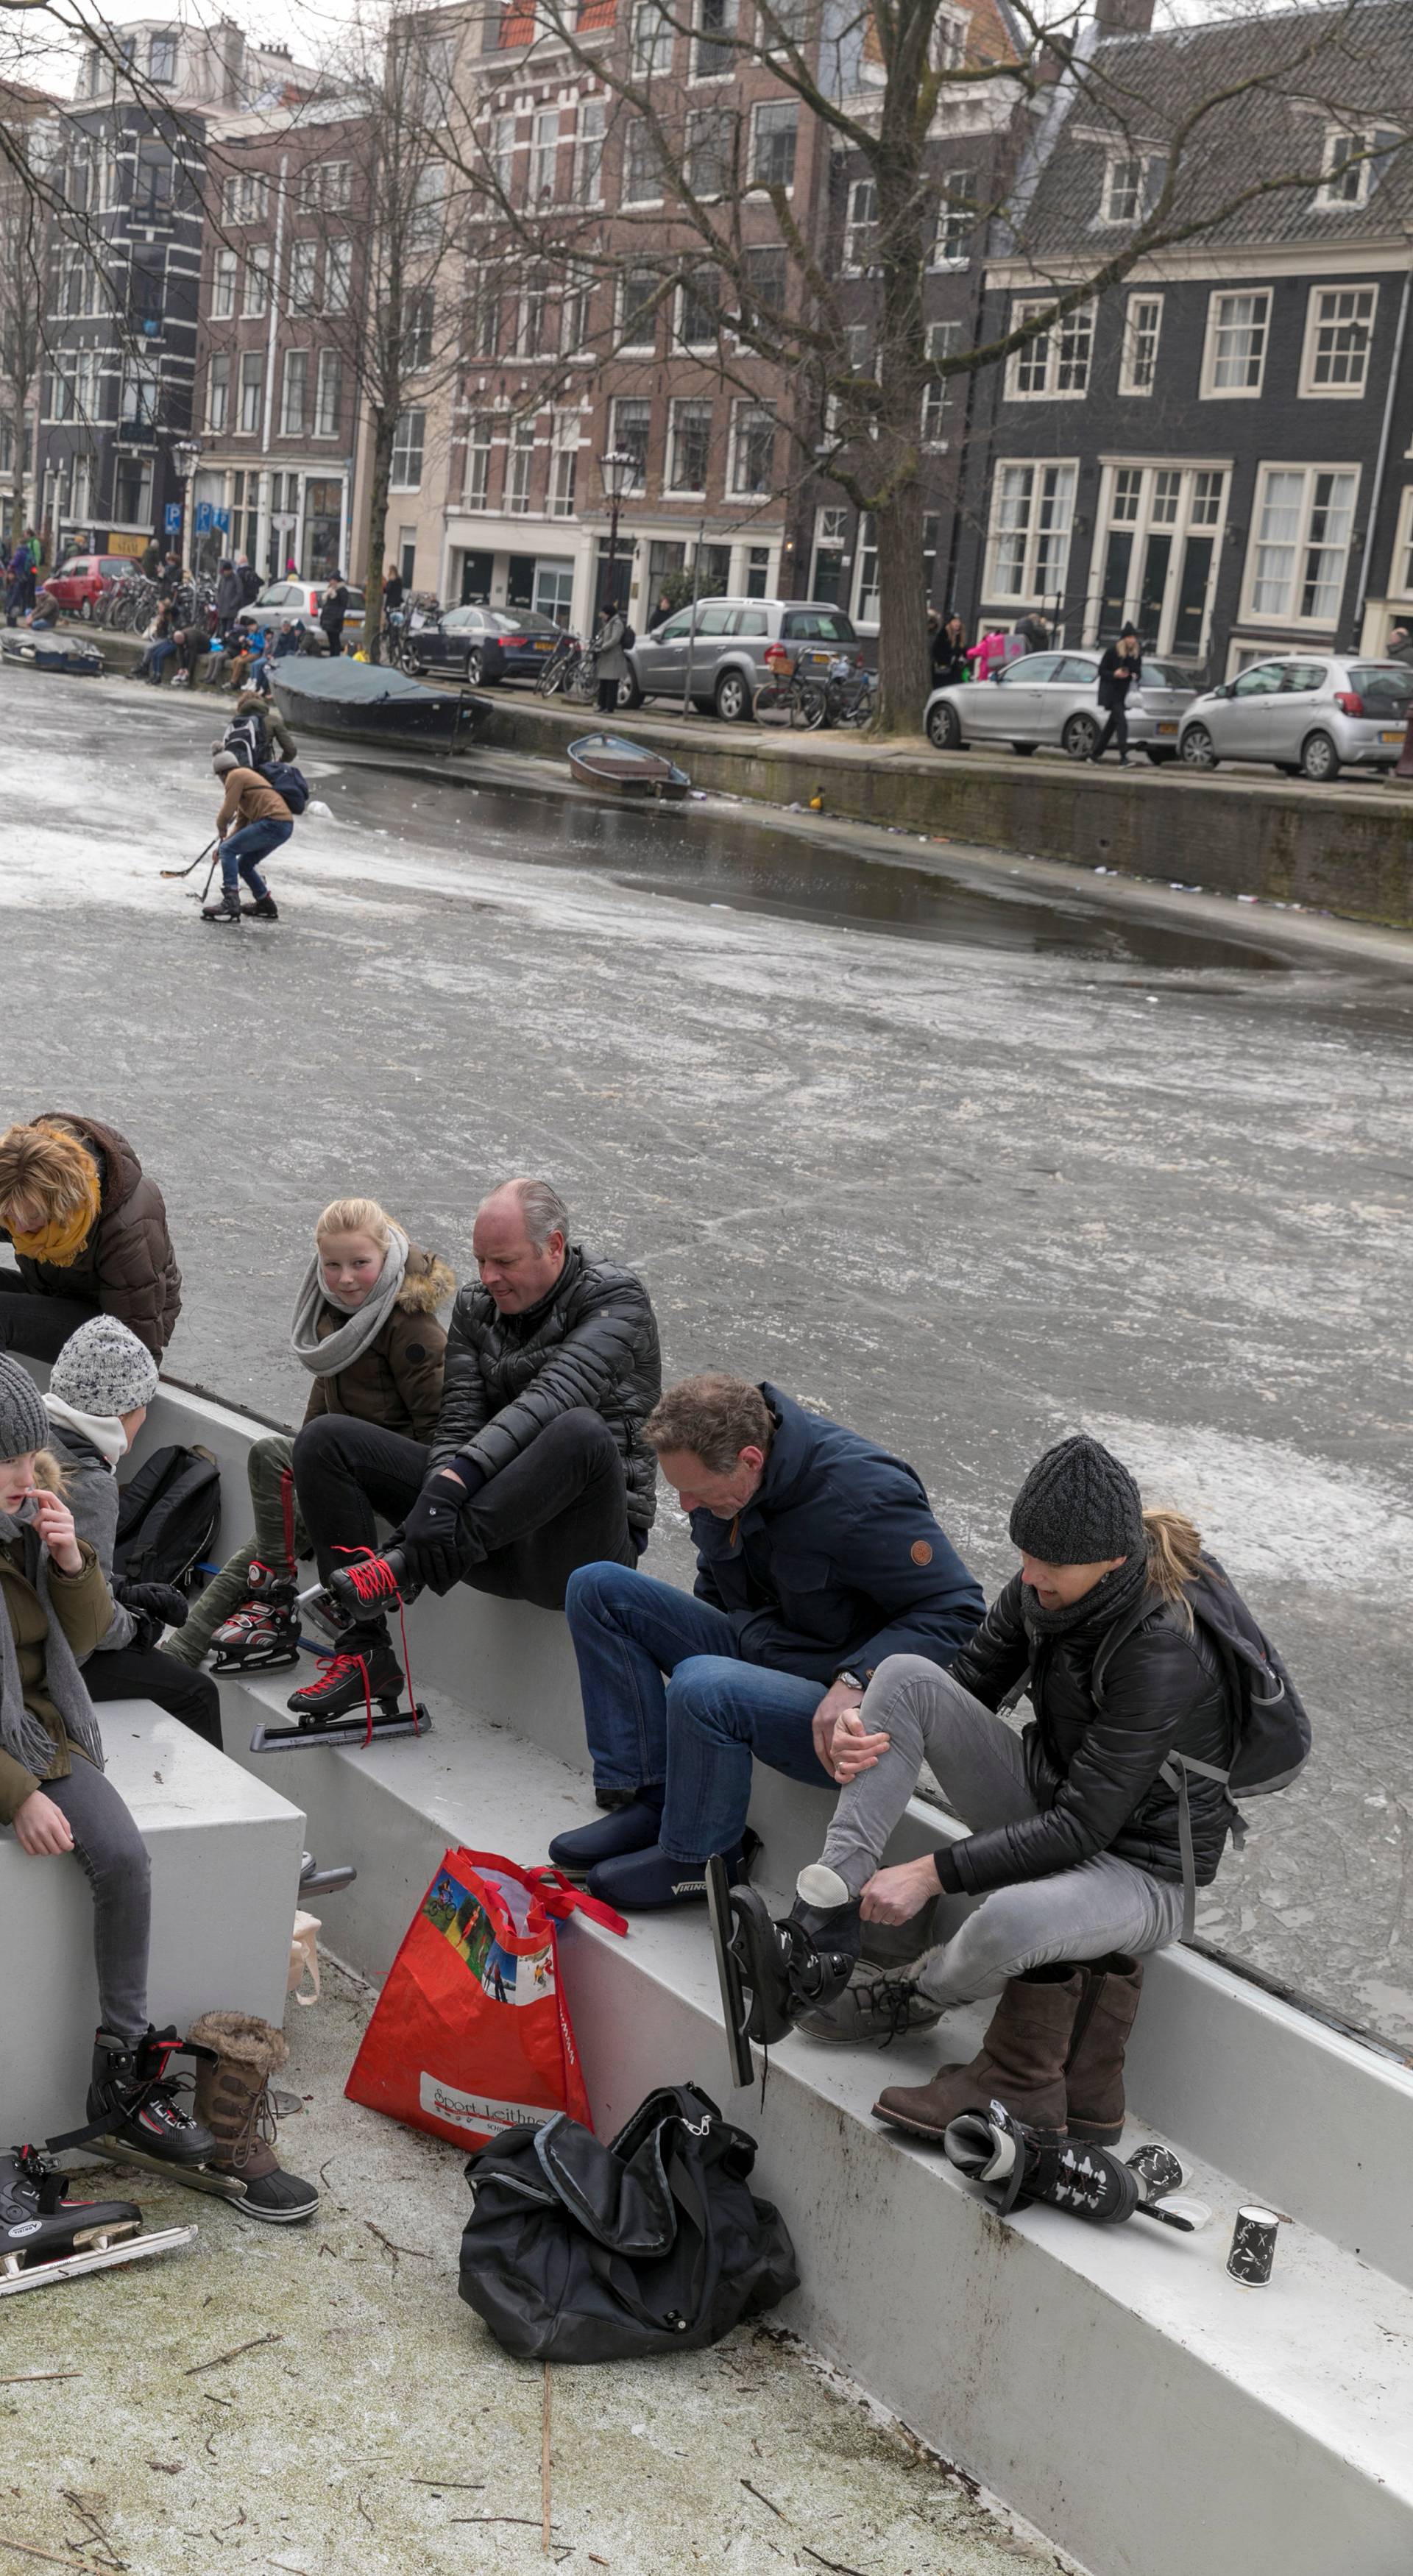 Ice skaters get ready to skate on frozen canal during icy weather in Amsterdam